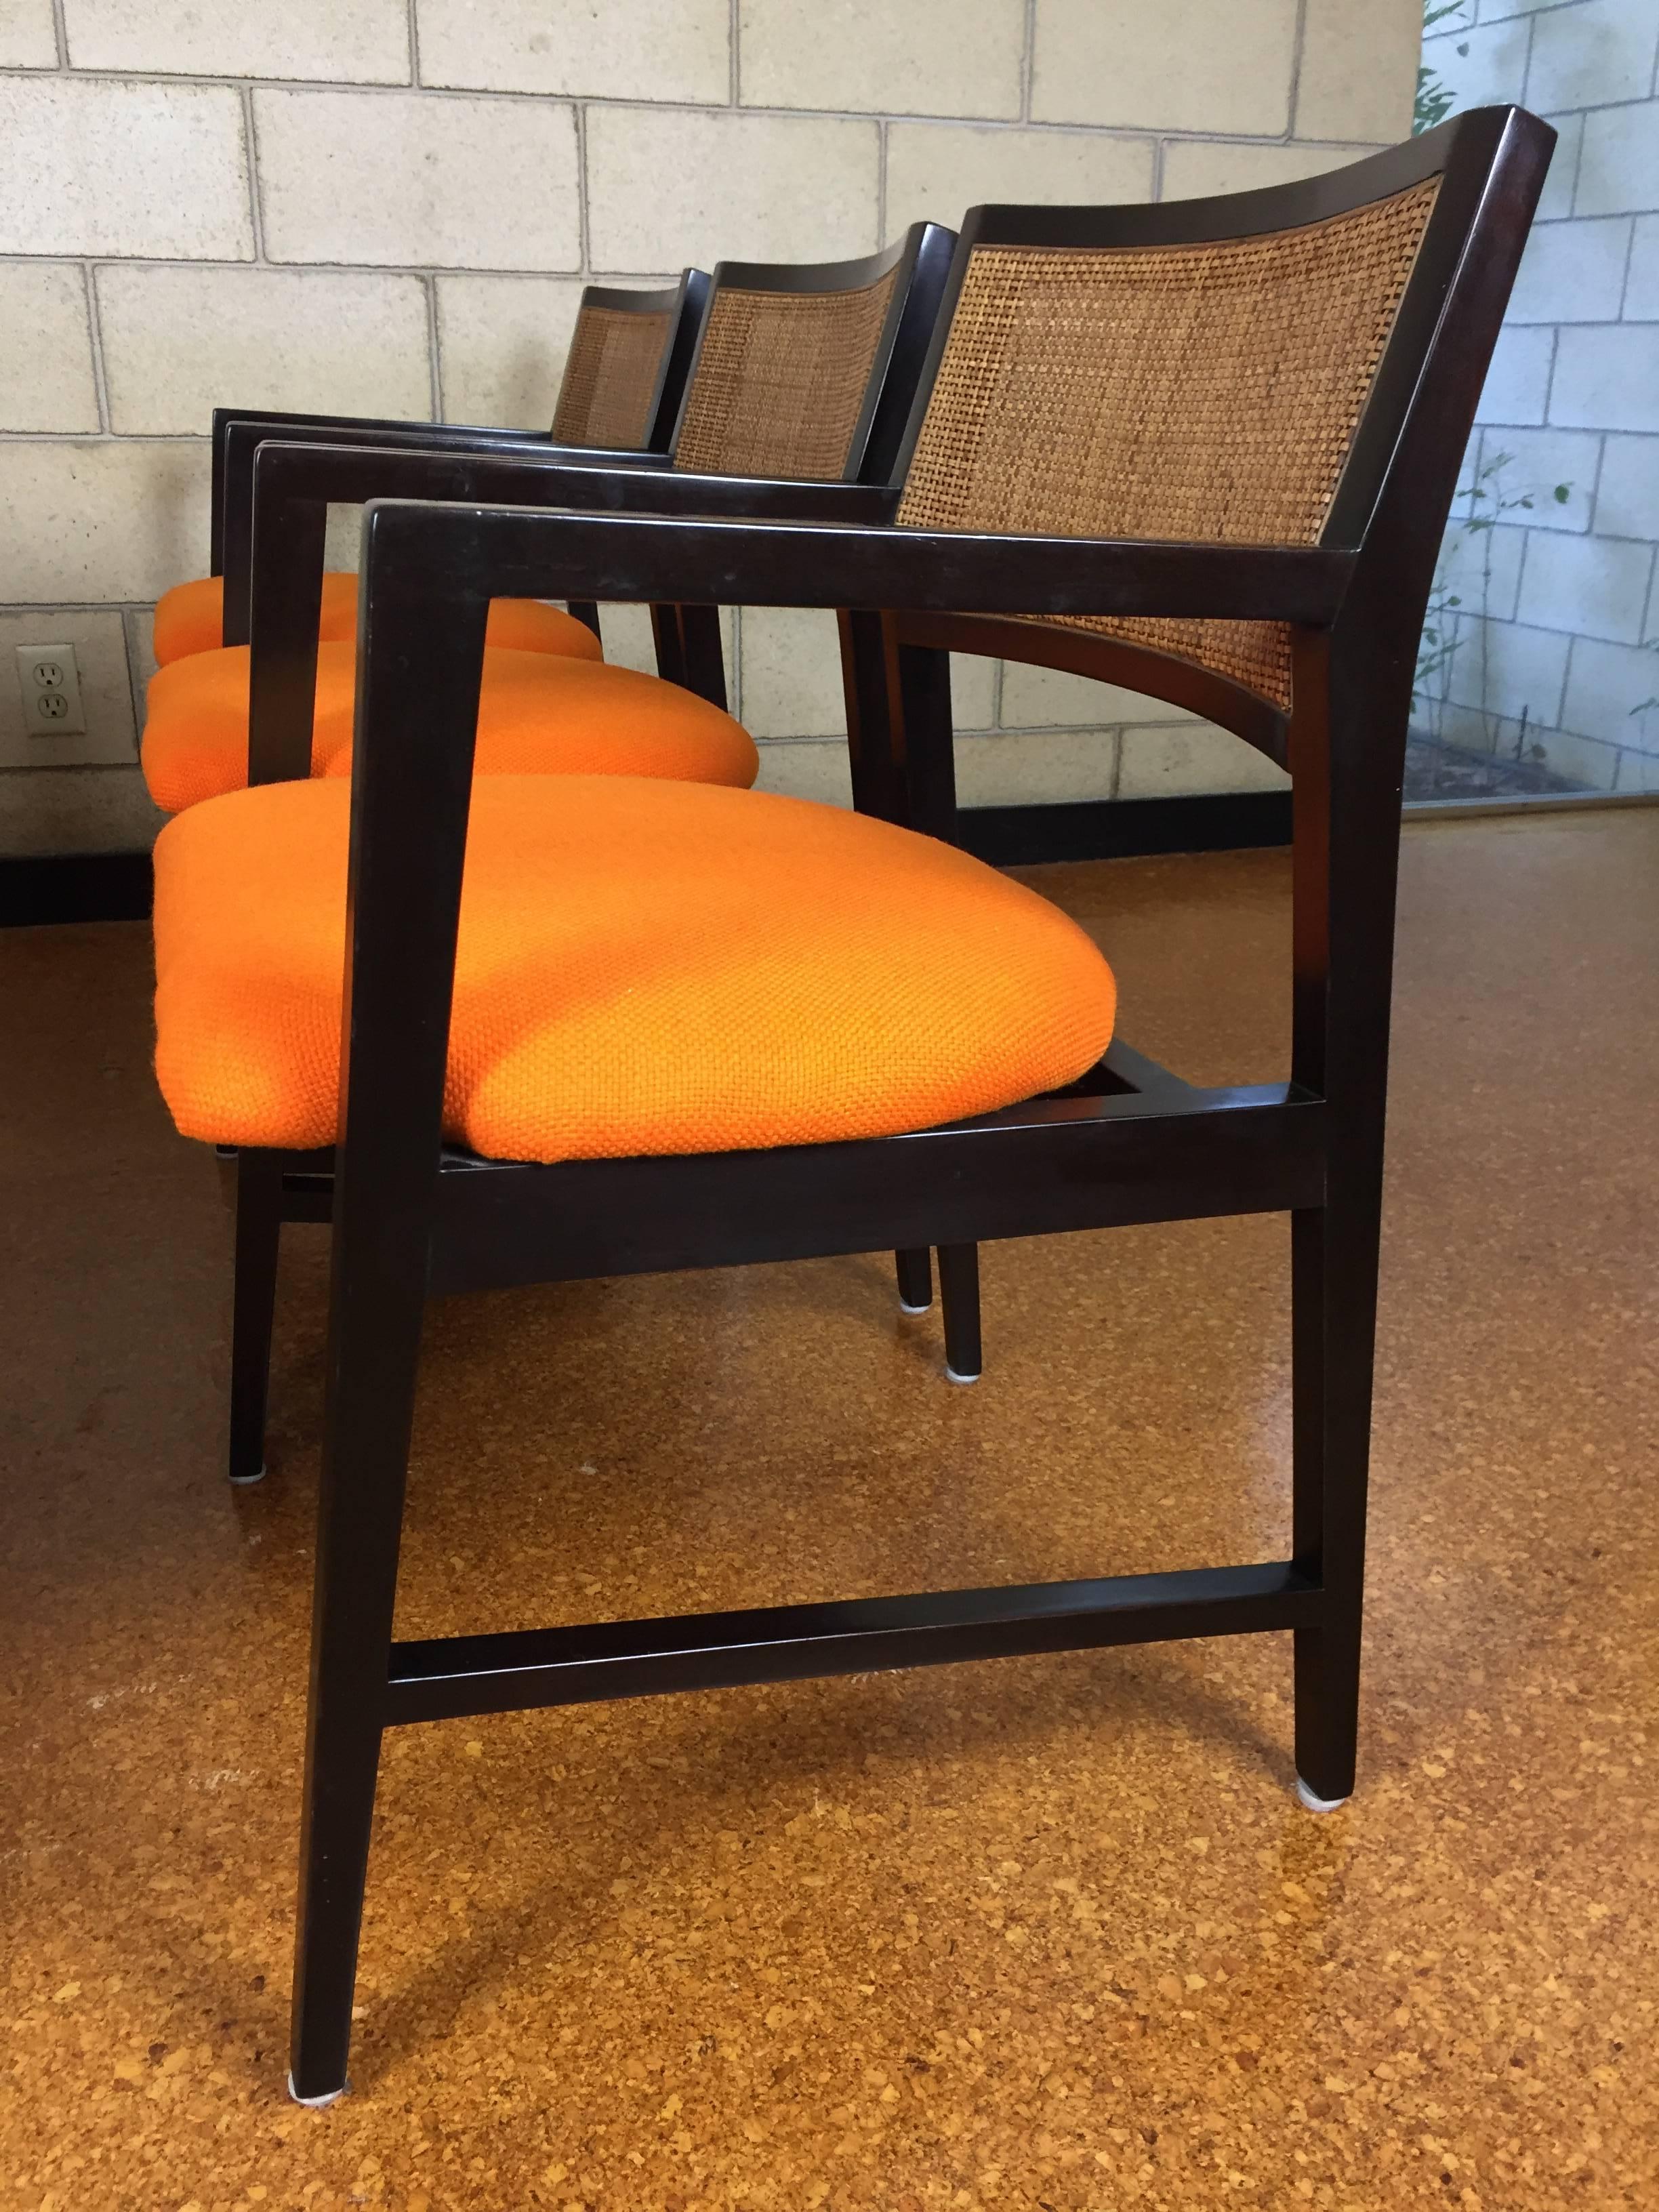 Absolutely gorgeous set of six Edward Wormley for Dunbar dining armchairs. Original condition with minimal. Reupholstered in vintage Herman Miller orange tweed fabric. 

Measures: 22" wide x 20" deep x 31" tall. 18" seat height.